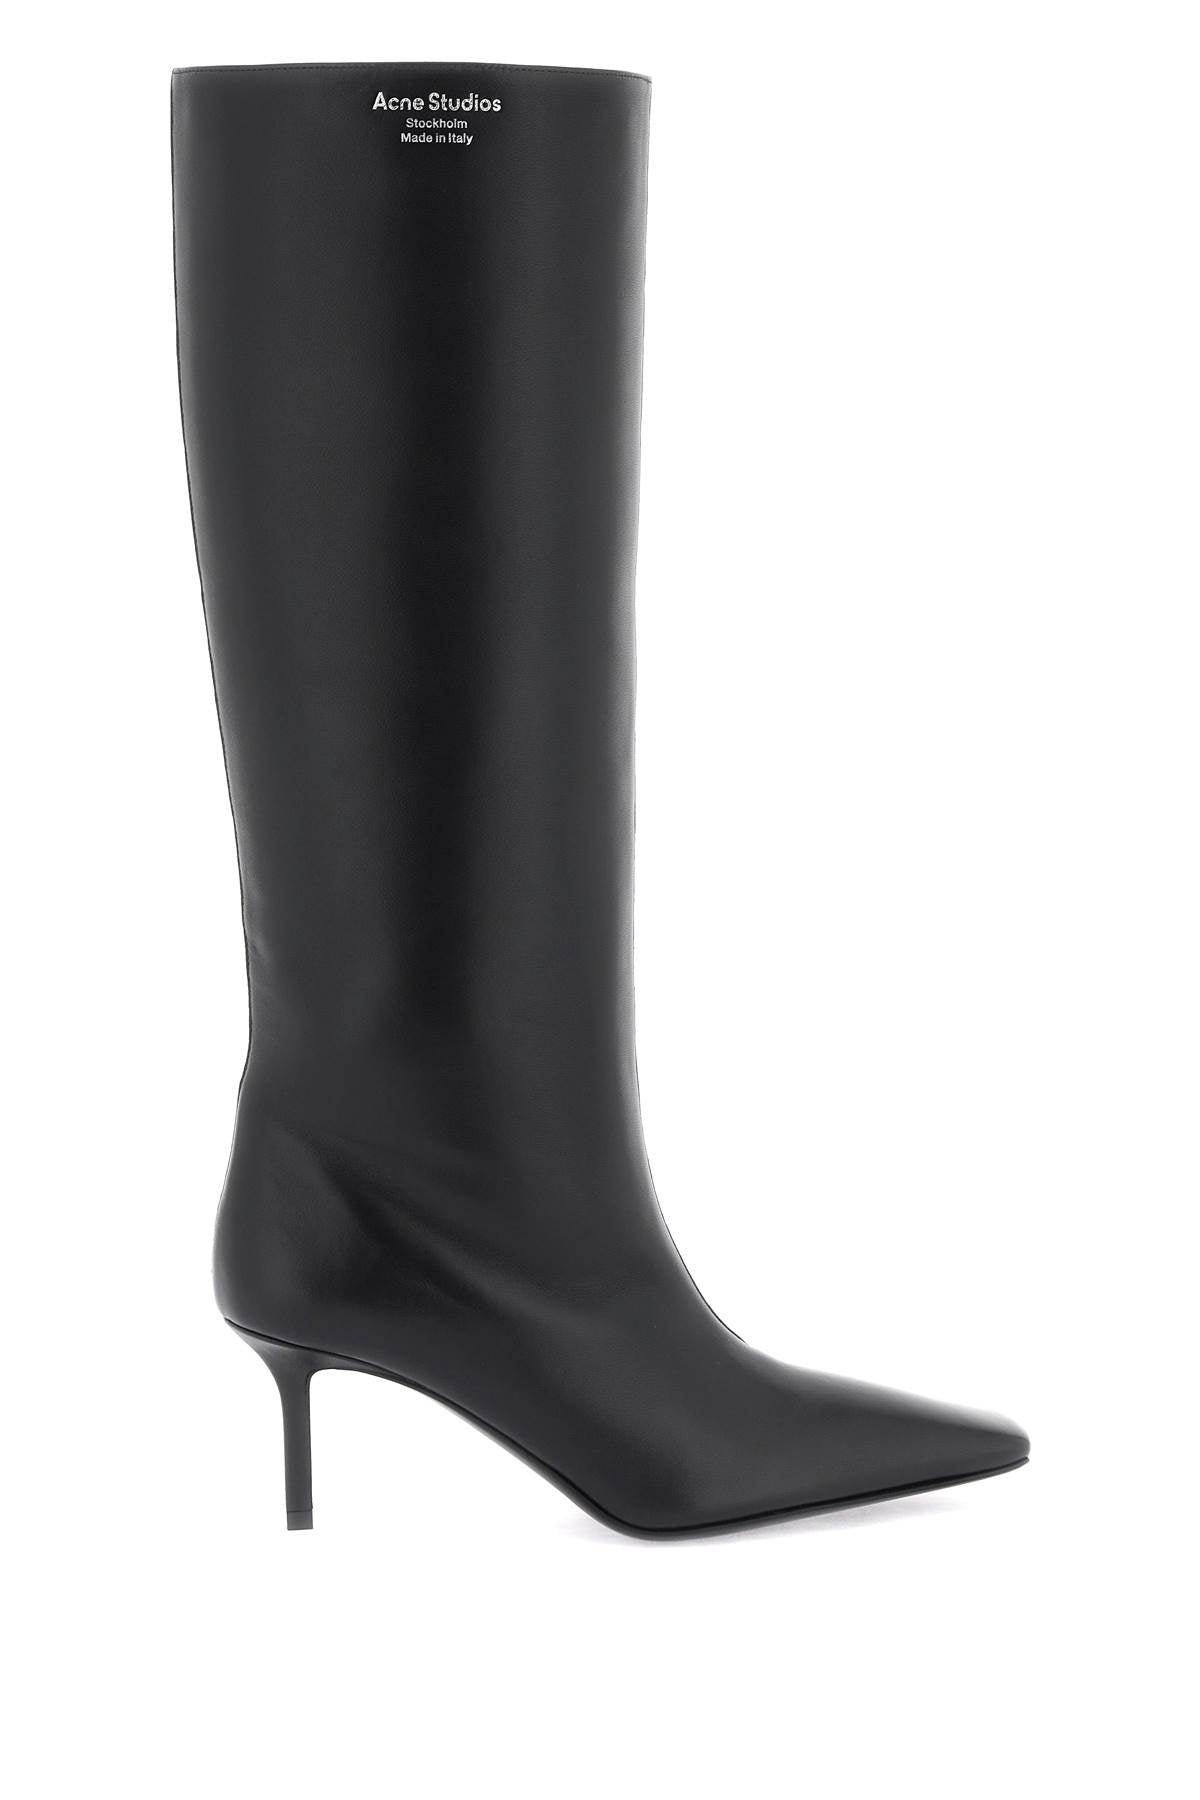 ACNE STUDIOS Black Leather Boots with a Sleek Design for Women - SS24